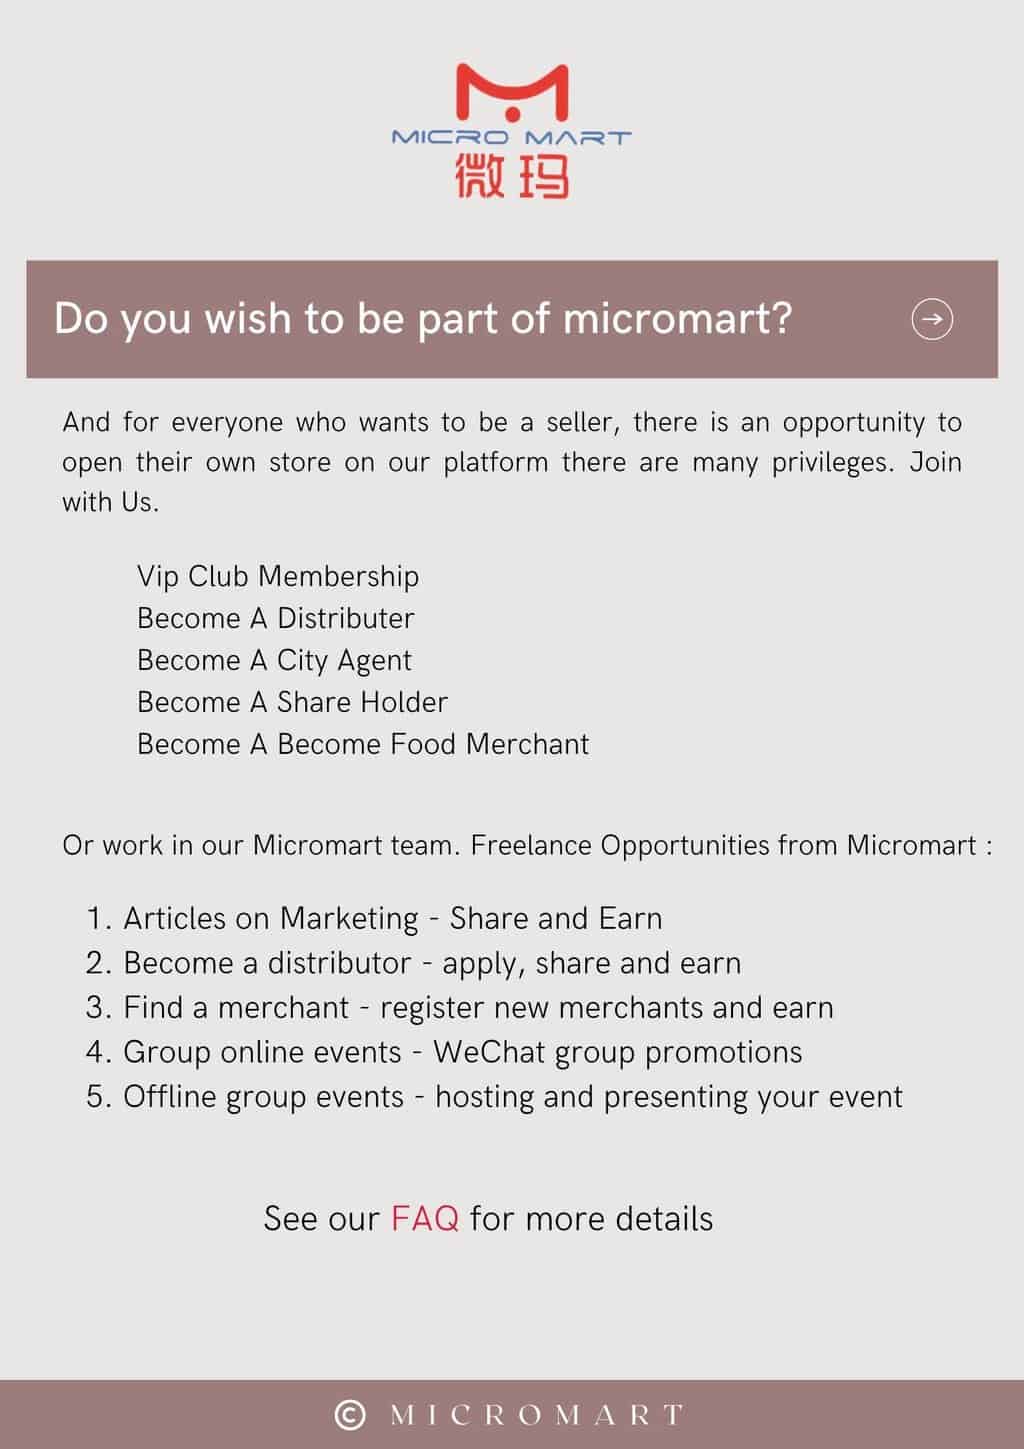 Micromart - Be a Part